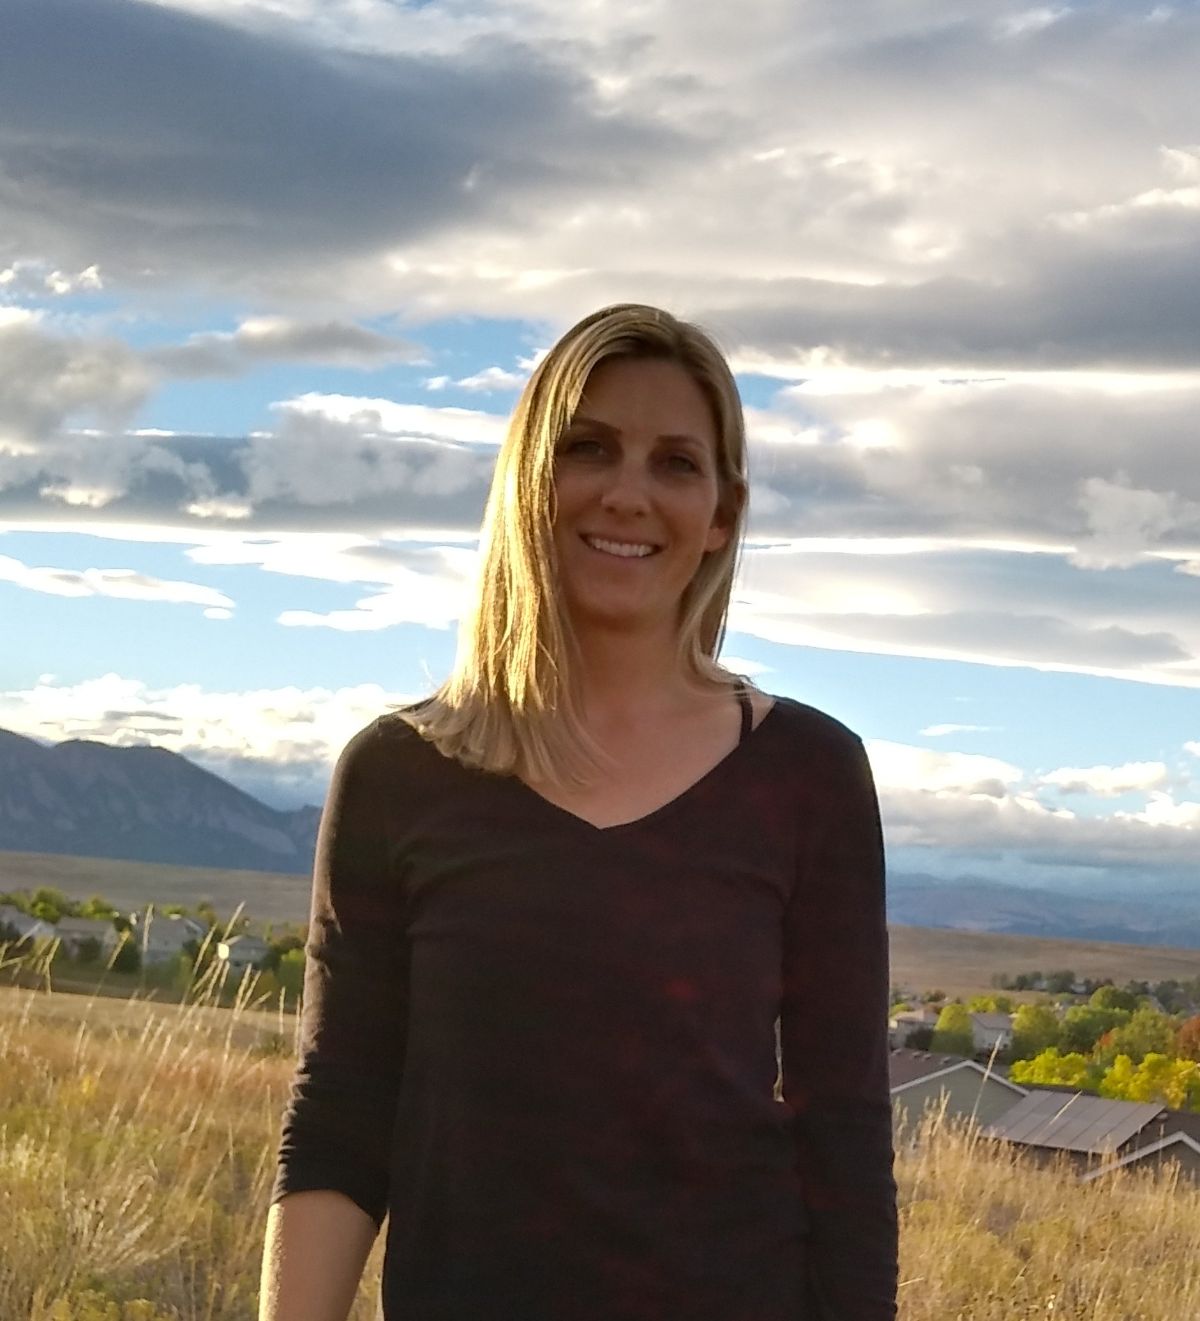 Cassie Kerr has short blonde hair and is standing outside in front of the sky and mountains